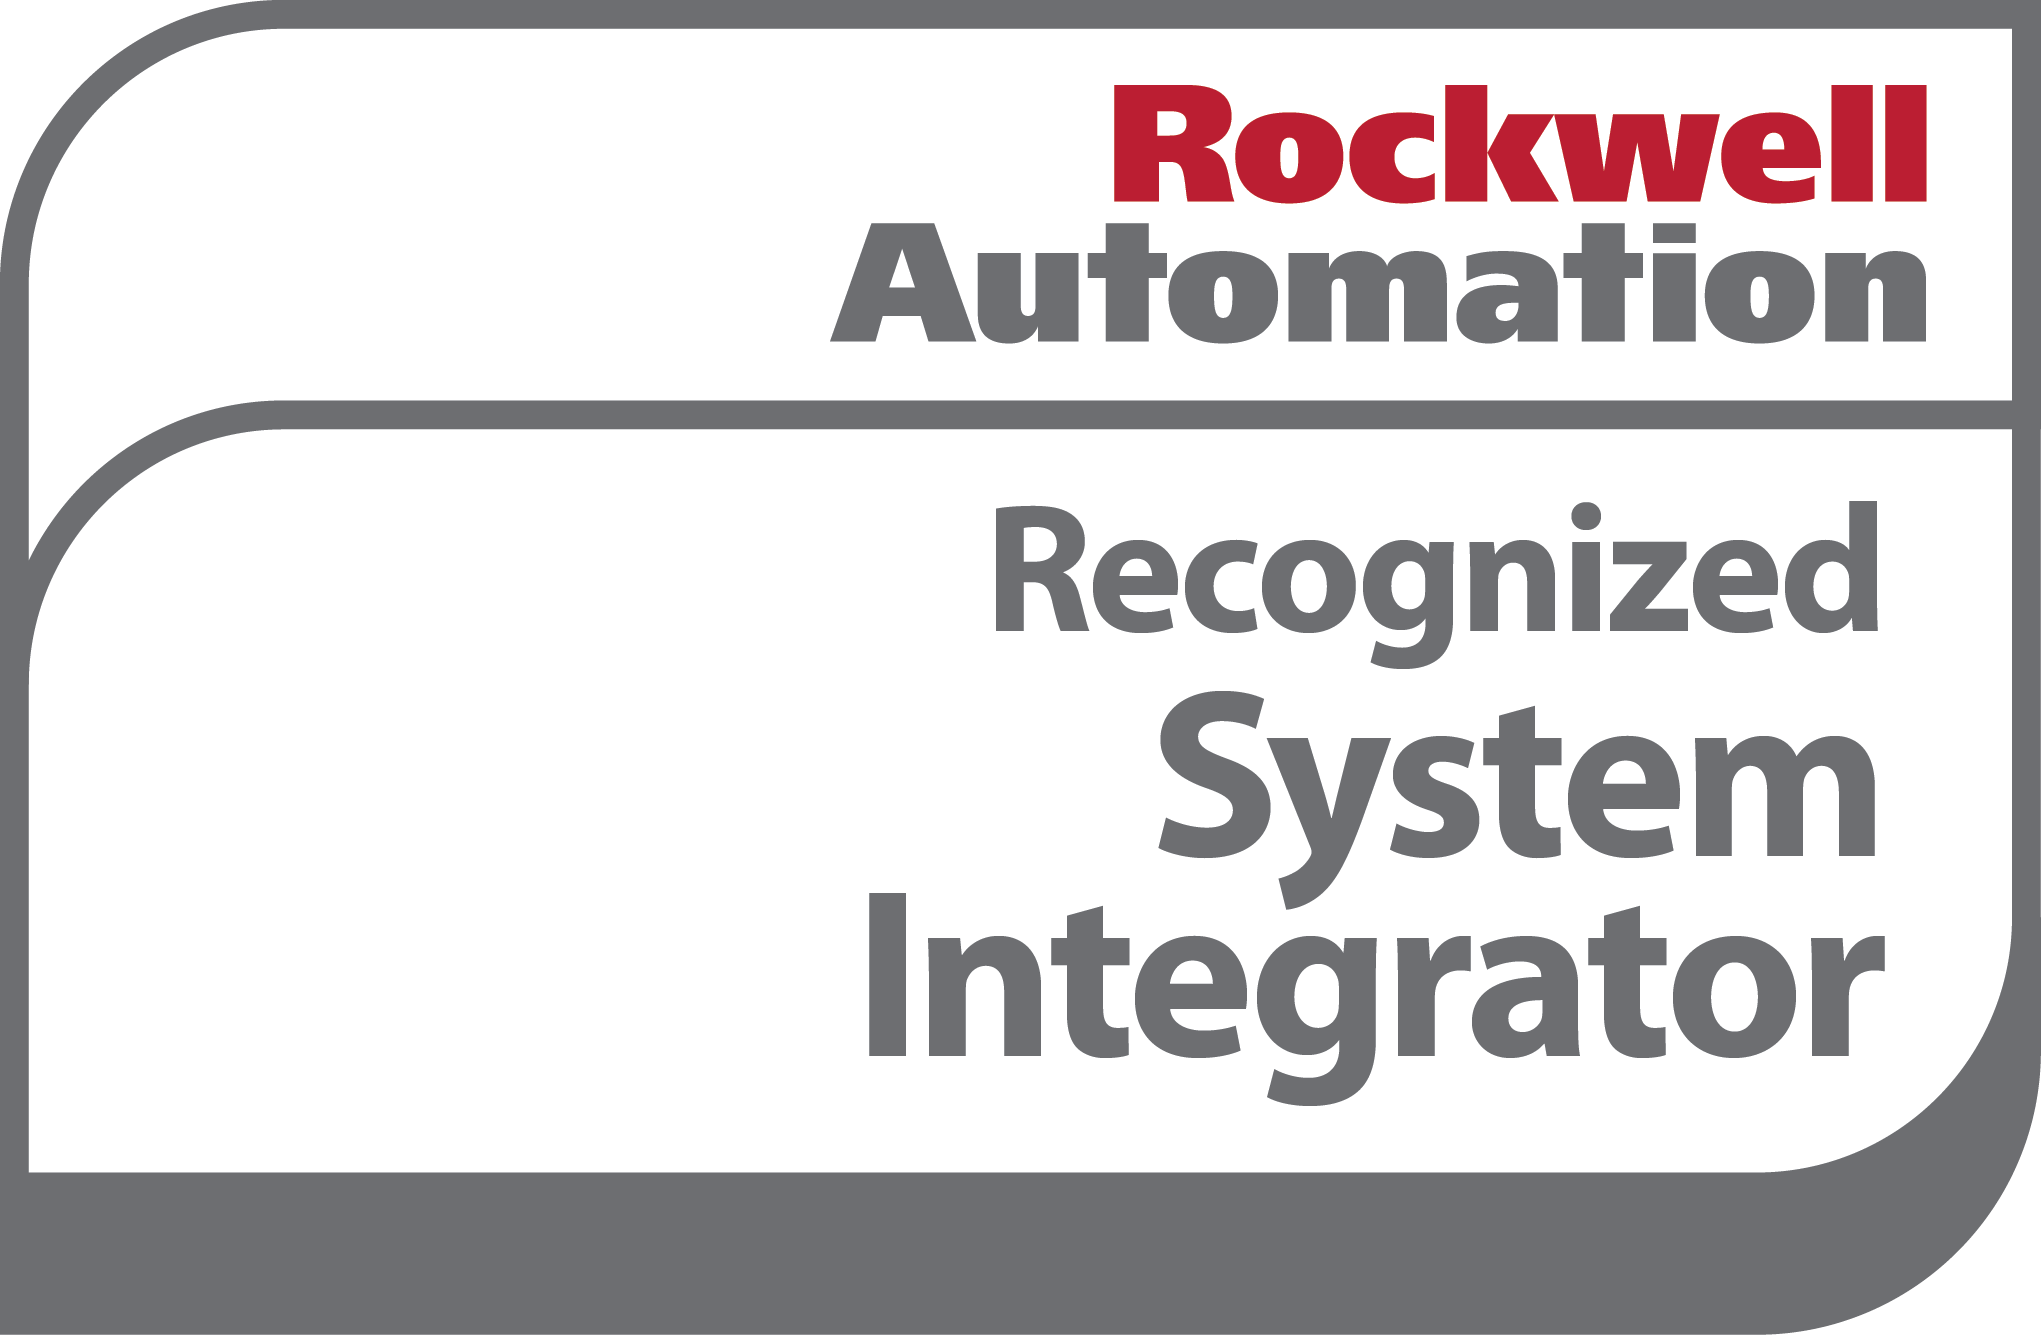 Rockwell Automation Recognized System Automation